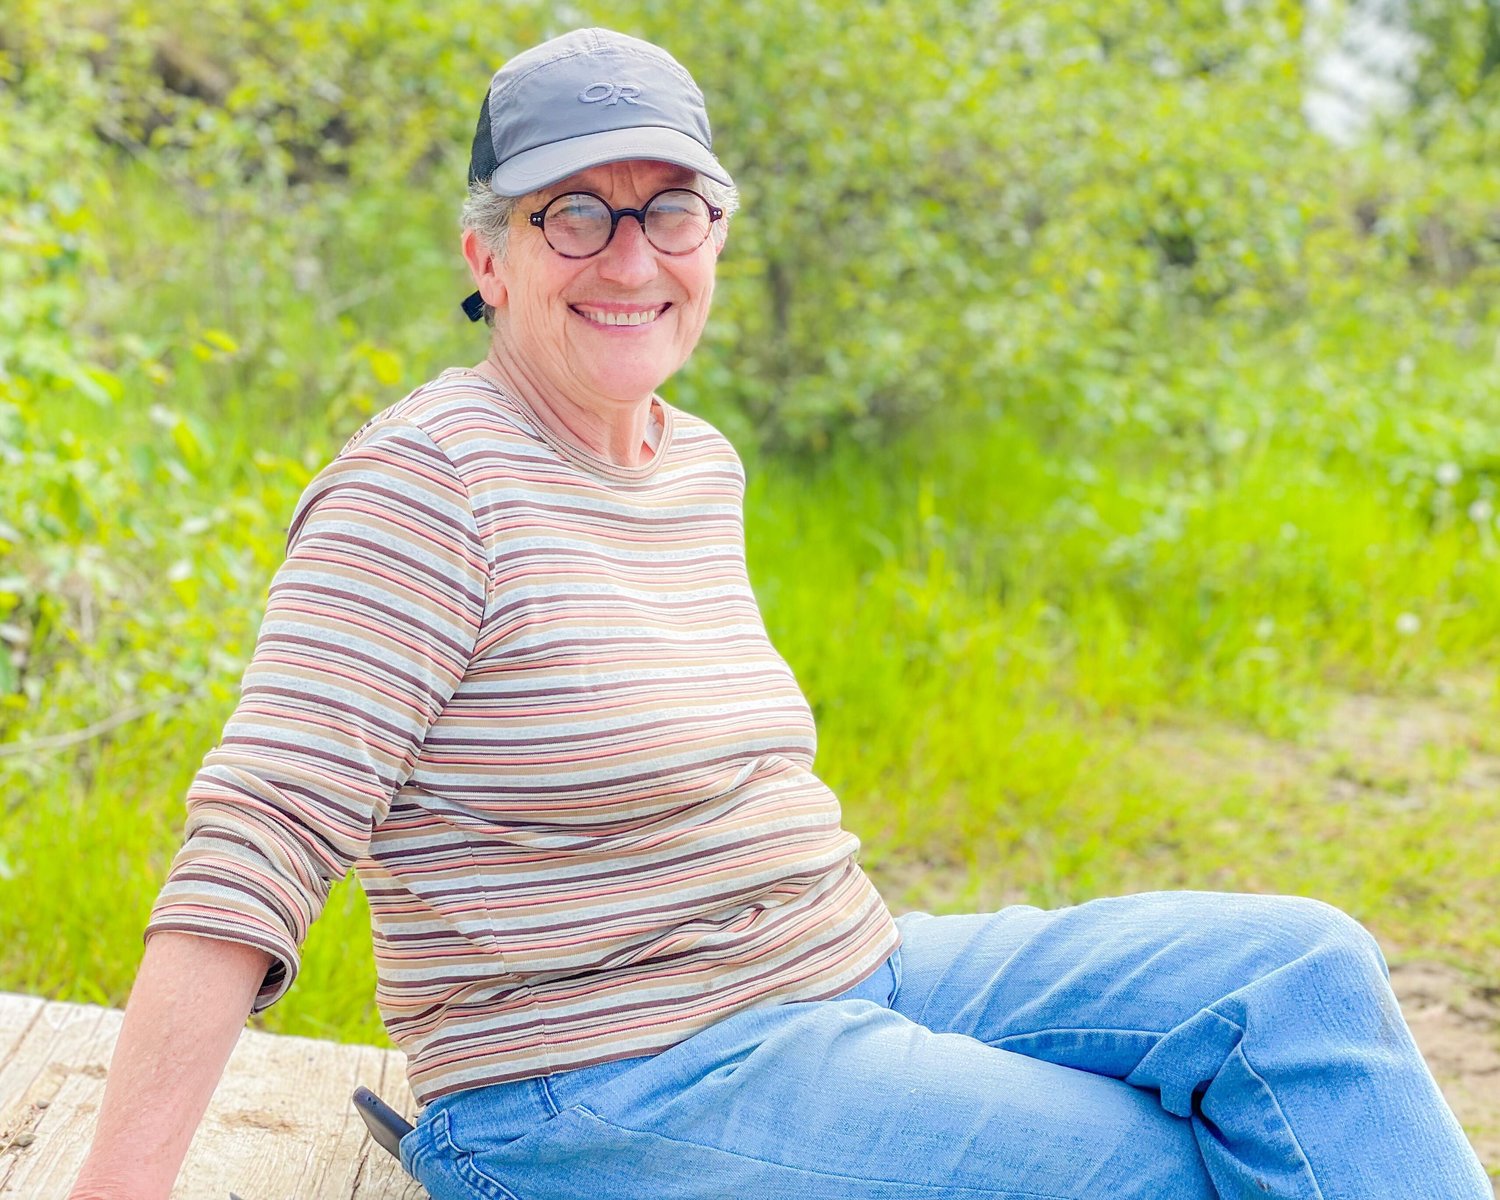 Betsie De Wreede, a retired farmer in the Independence Valley, smiles while sitting on a dock near her farm along the Chehalis River.